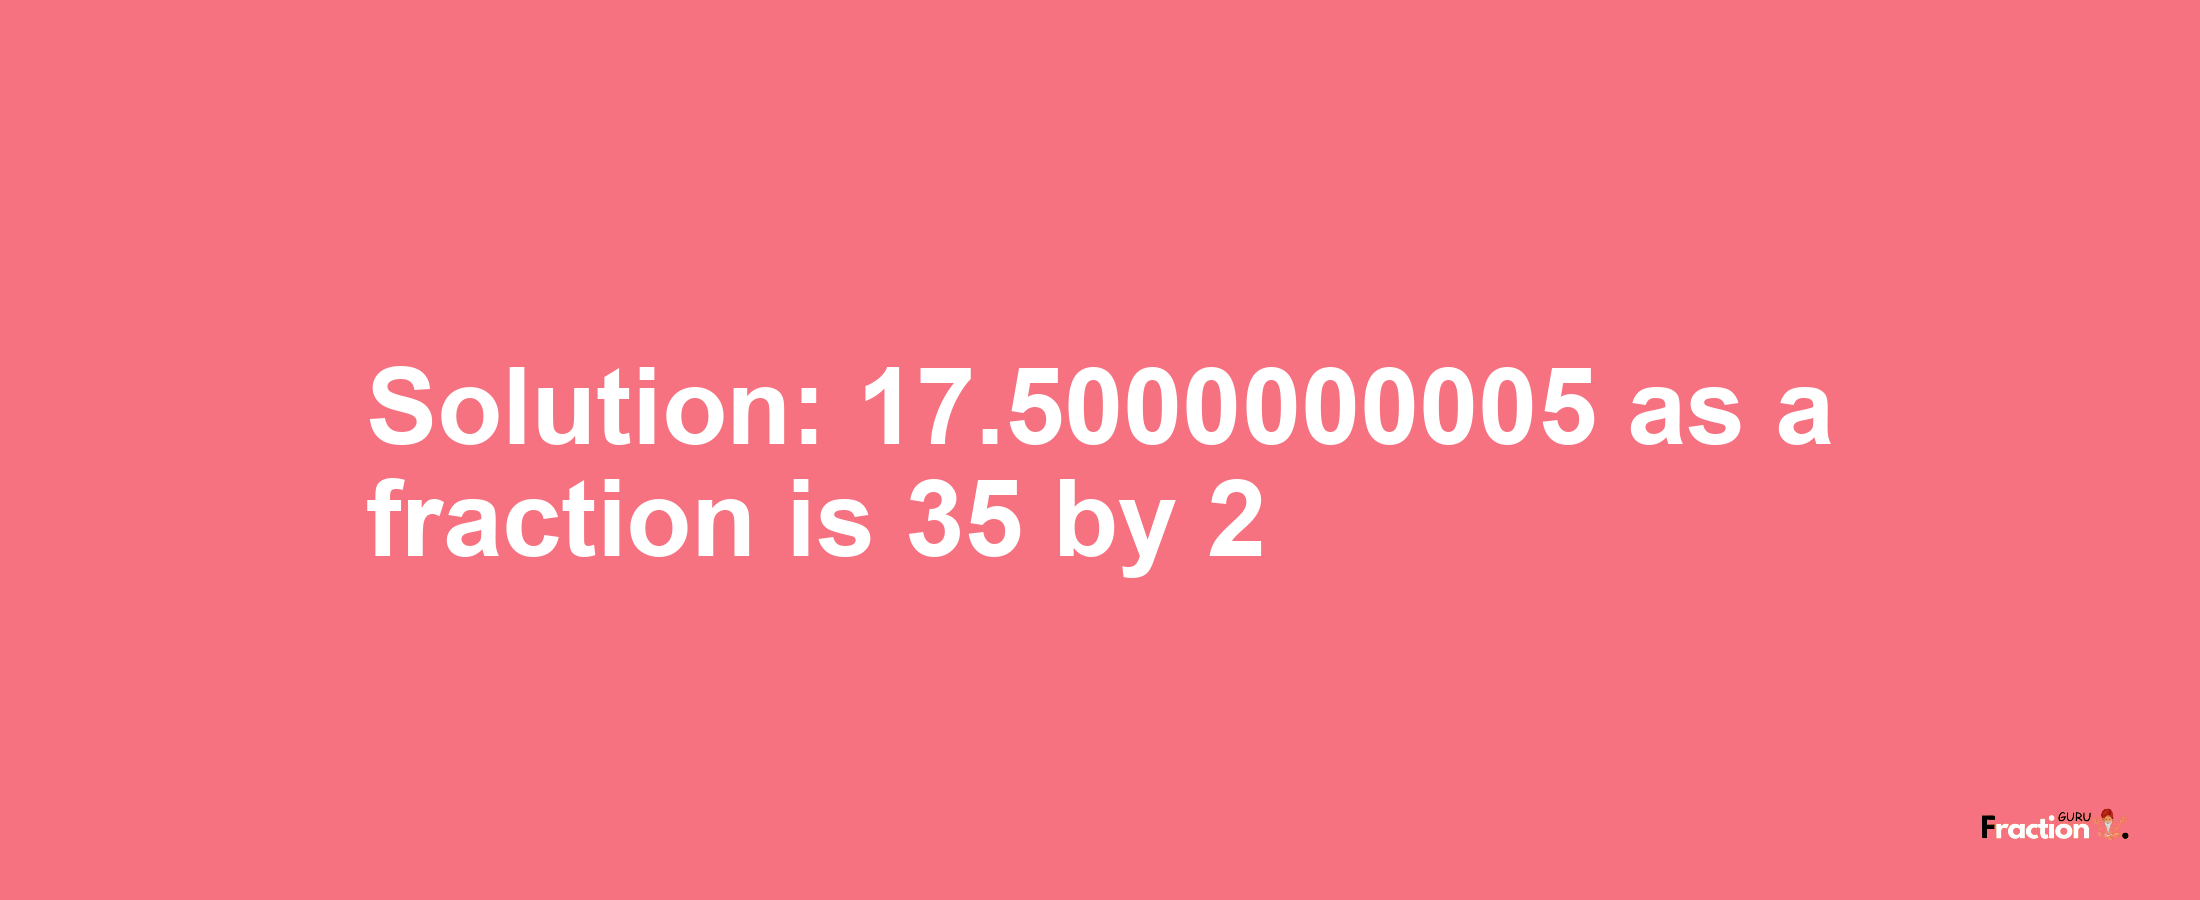 Solution:17.5000000005 as a fraction is 35/2